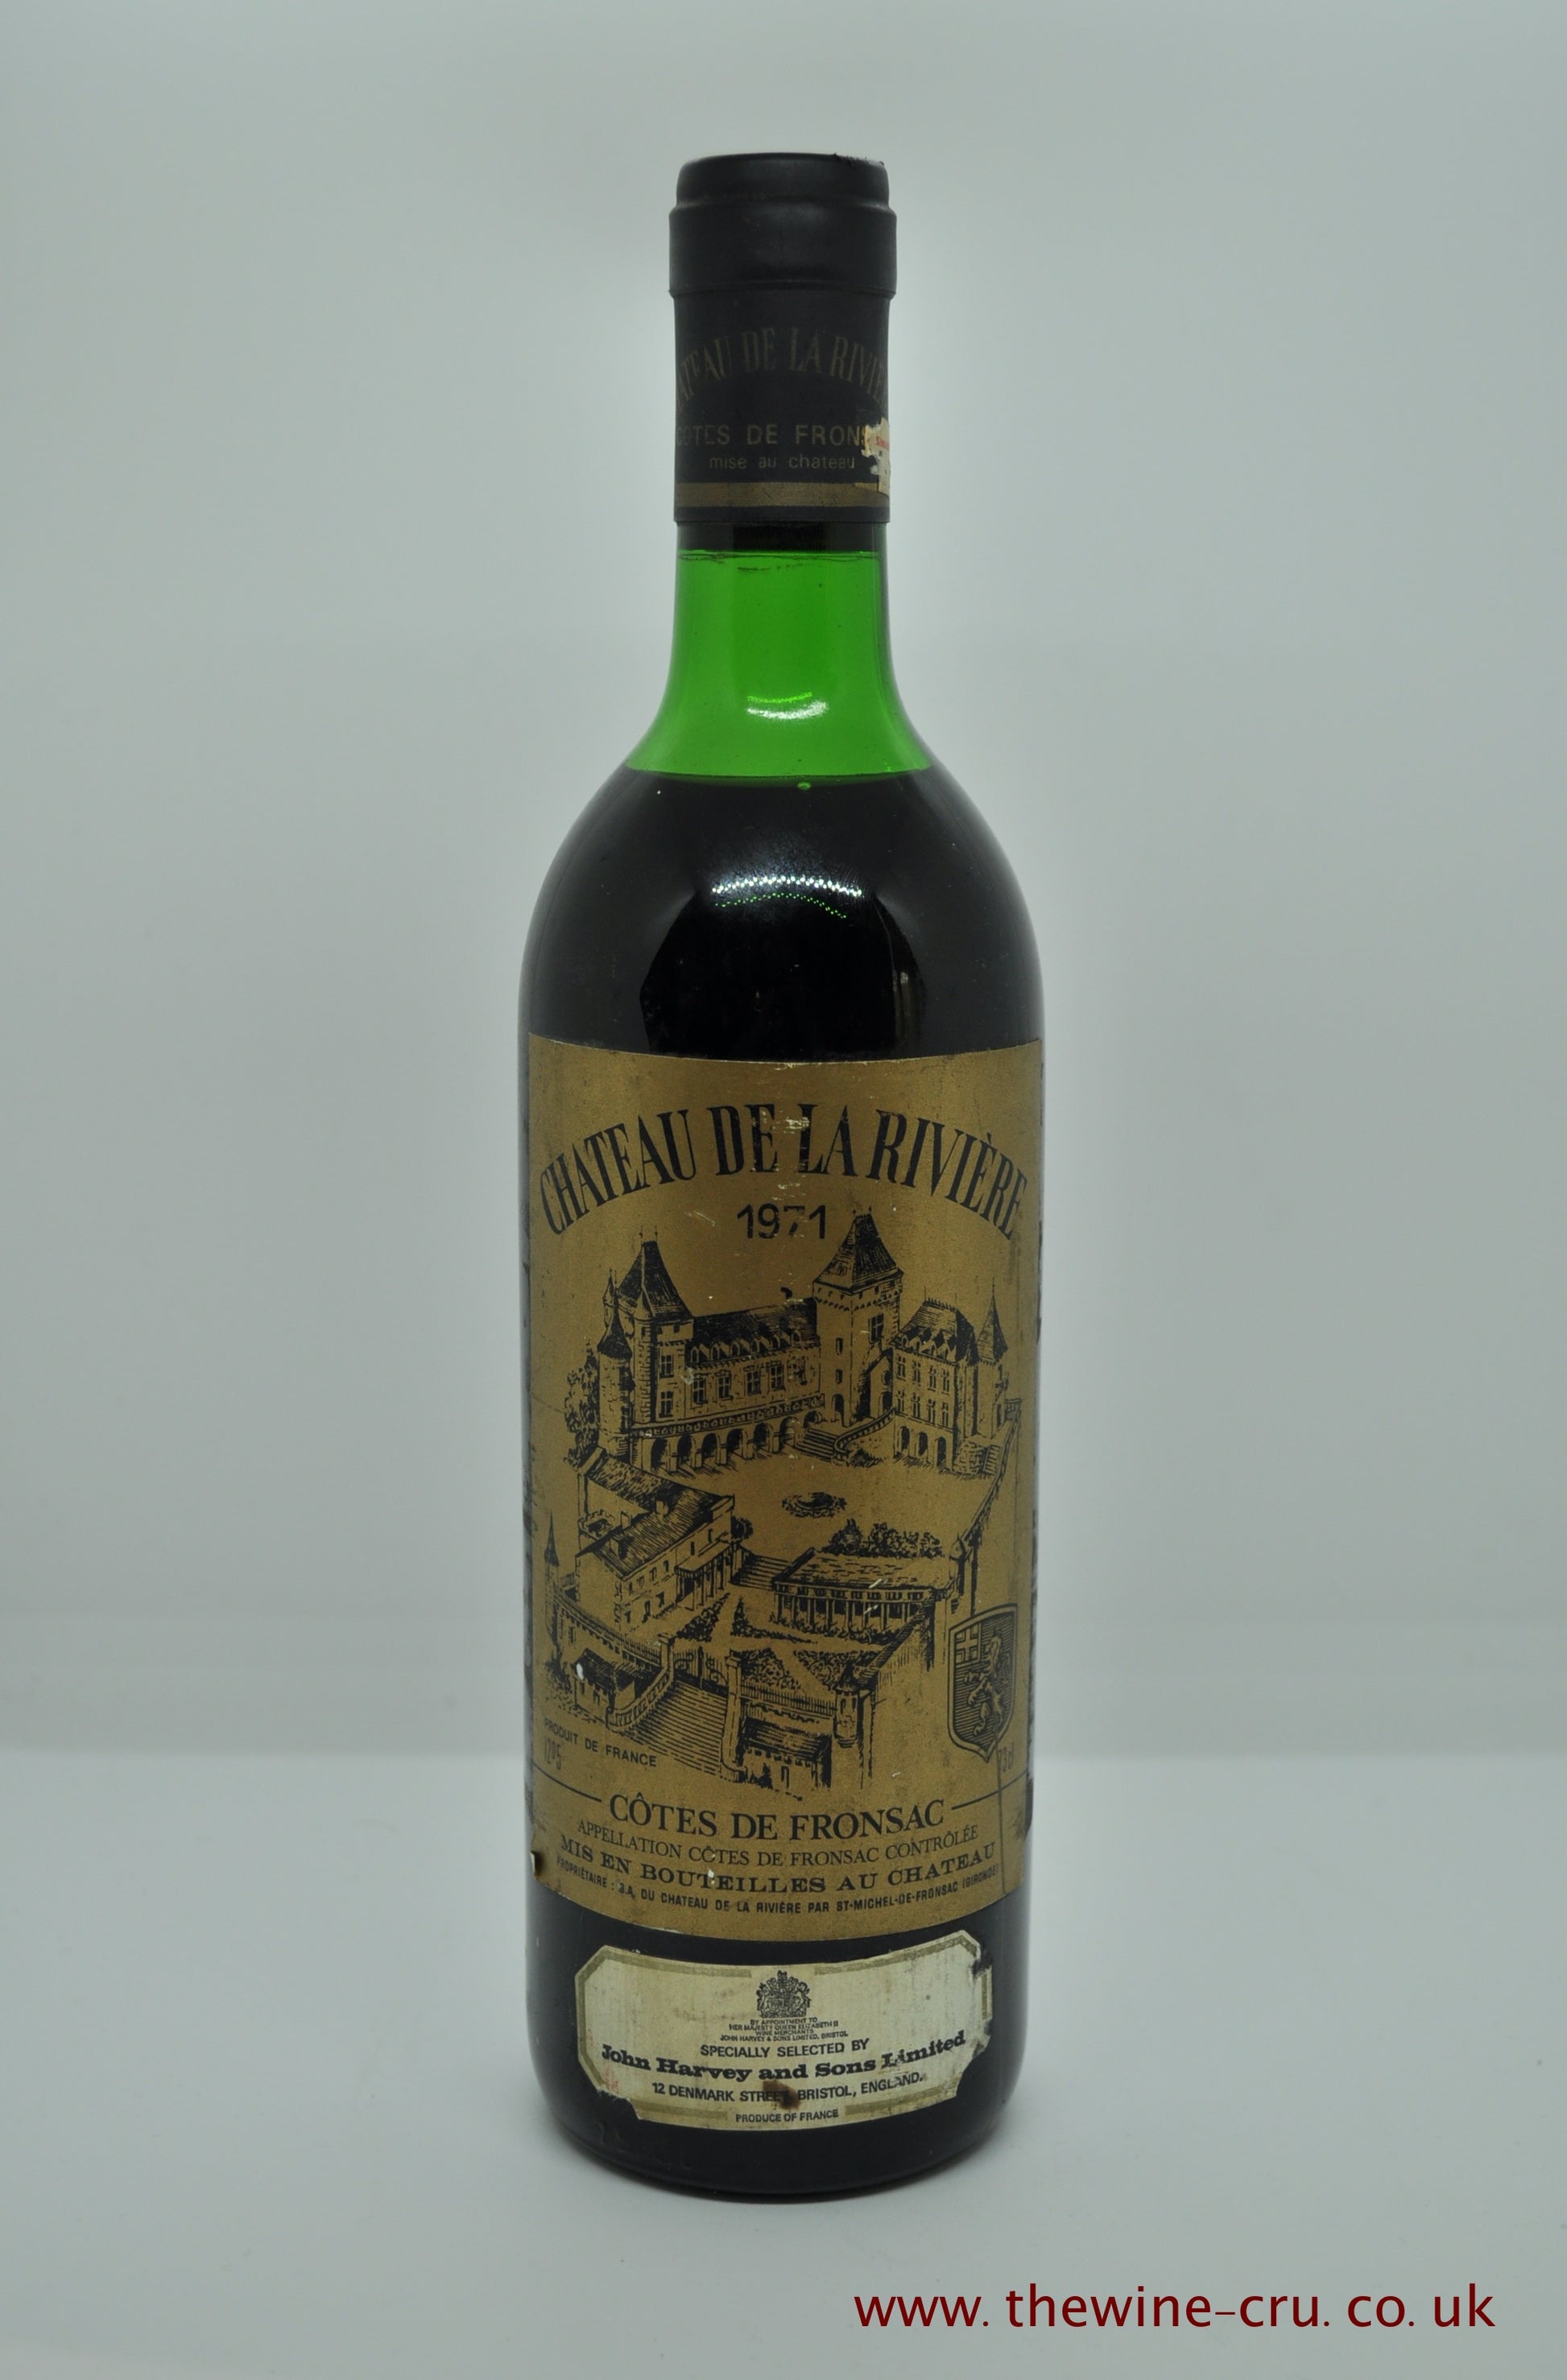 1971 vintage red wine. Chateau De La Riviere 1971. France Bordeaux. Immediate delivery. Free local delivery. Gift wrapping available.